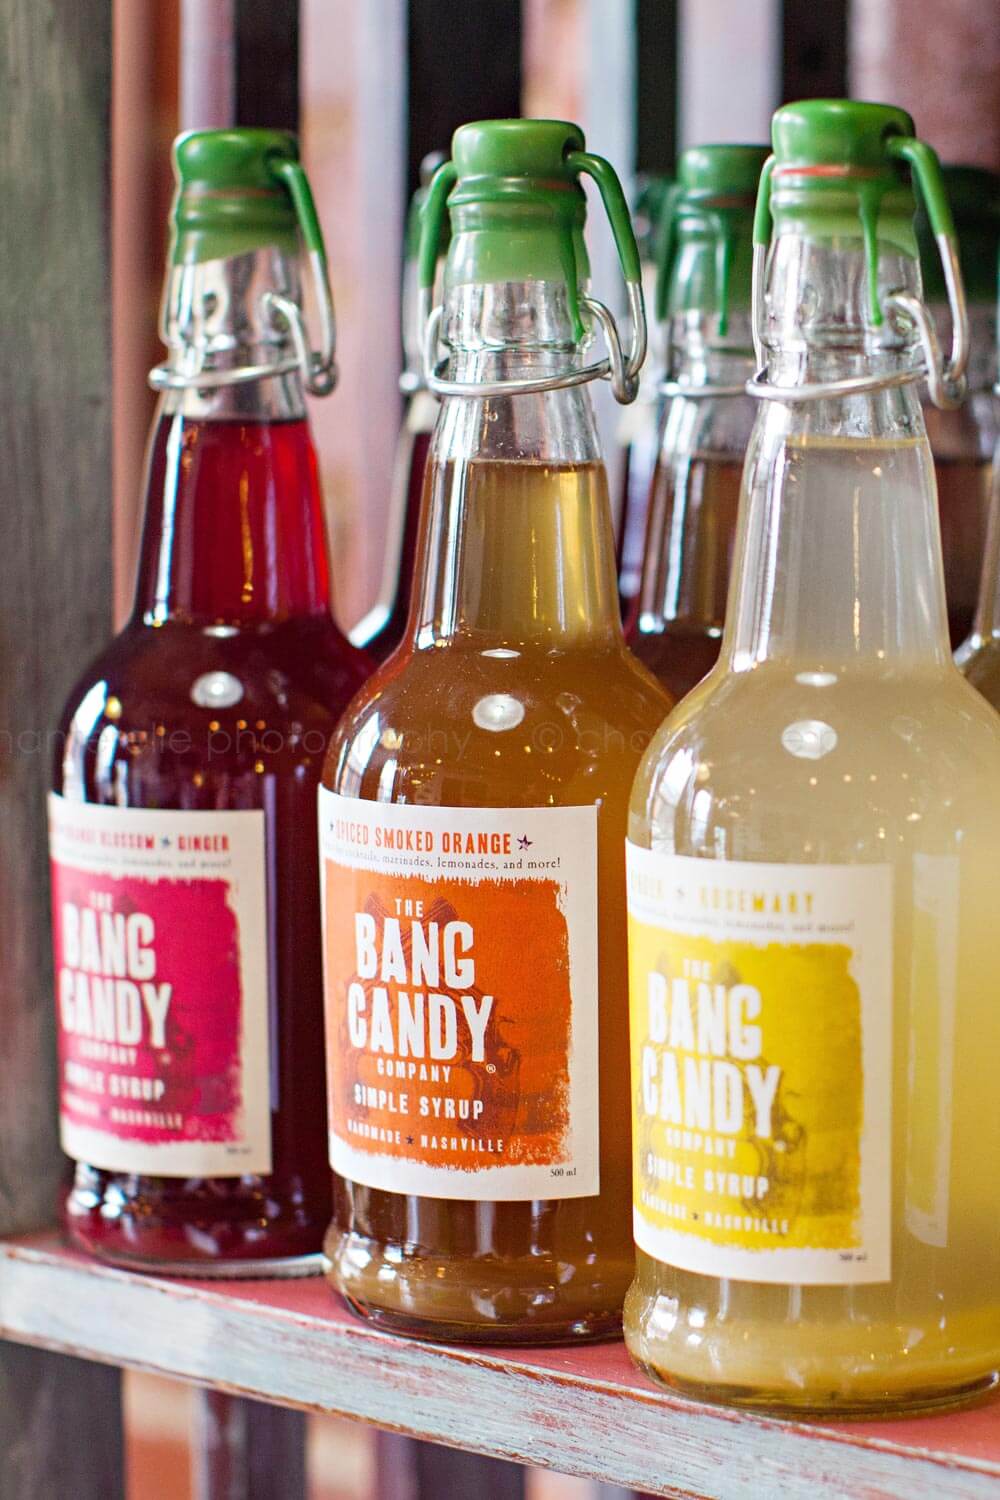 bang candy company syrups for cocktails